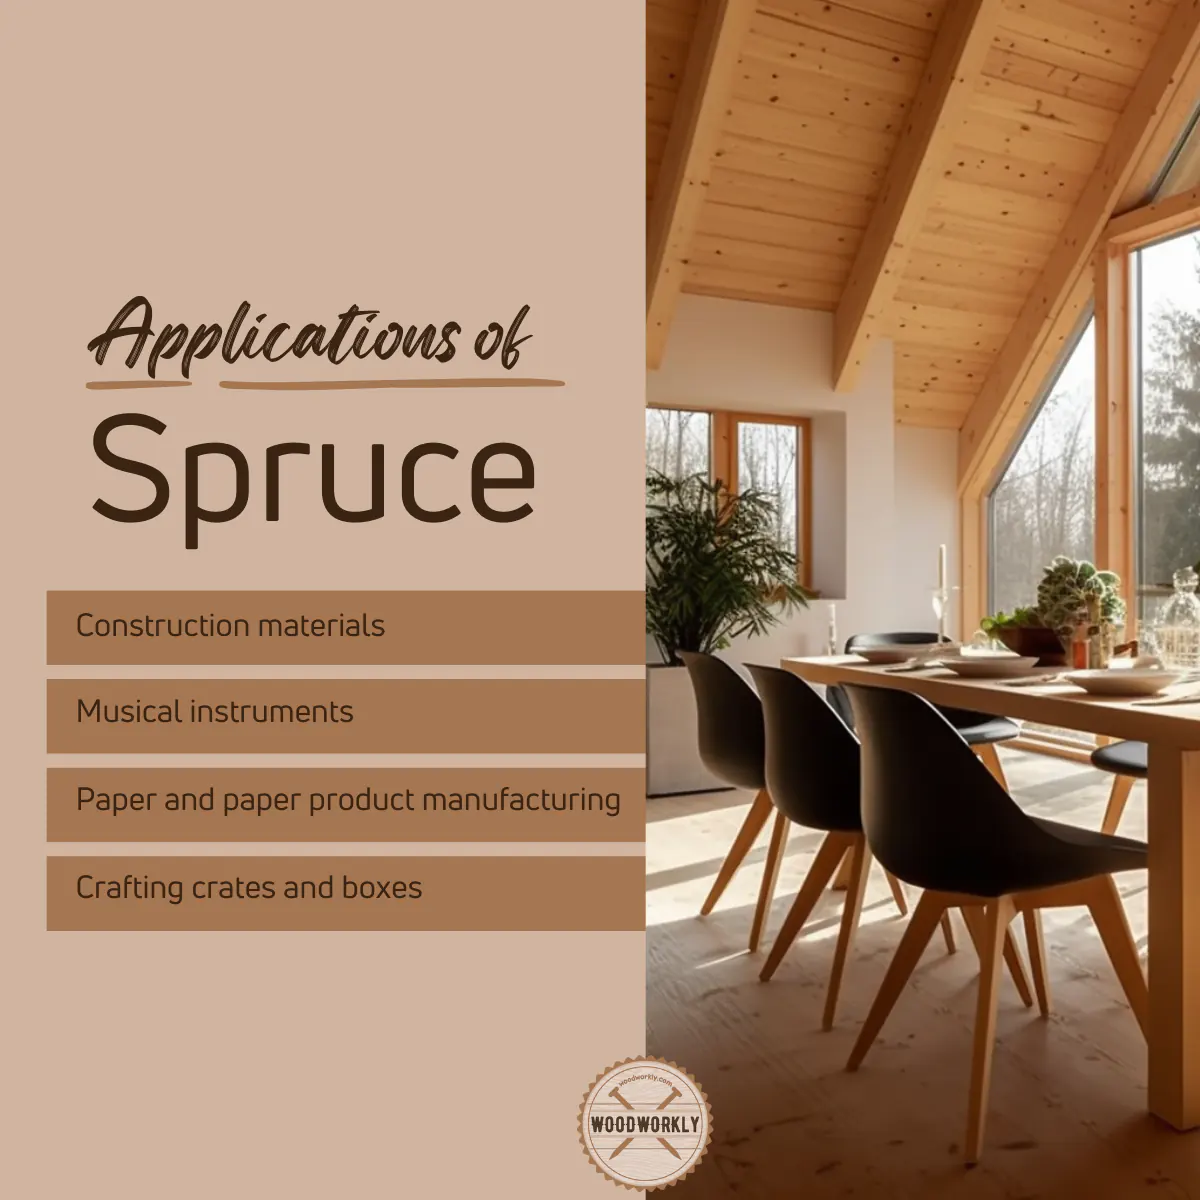 Uses of Spruce wood